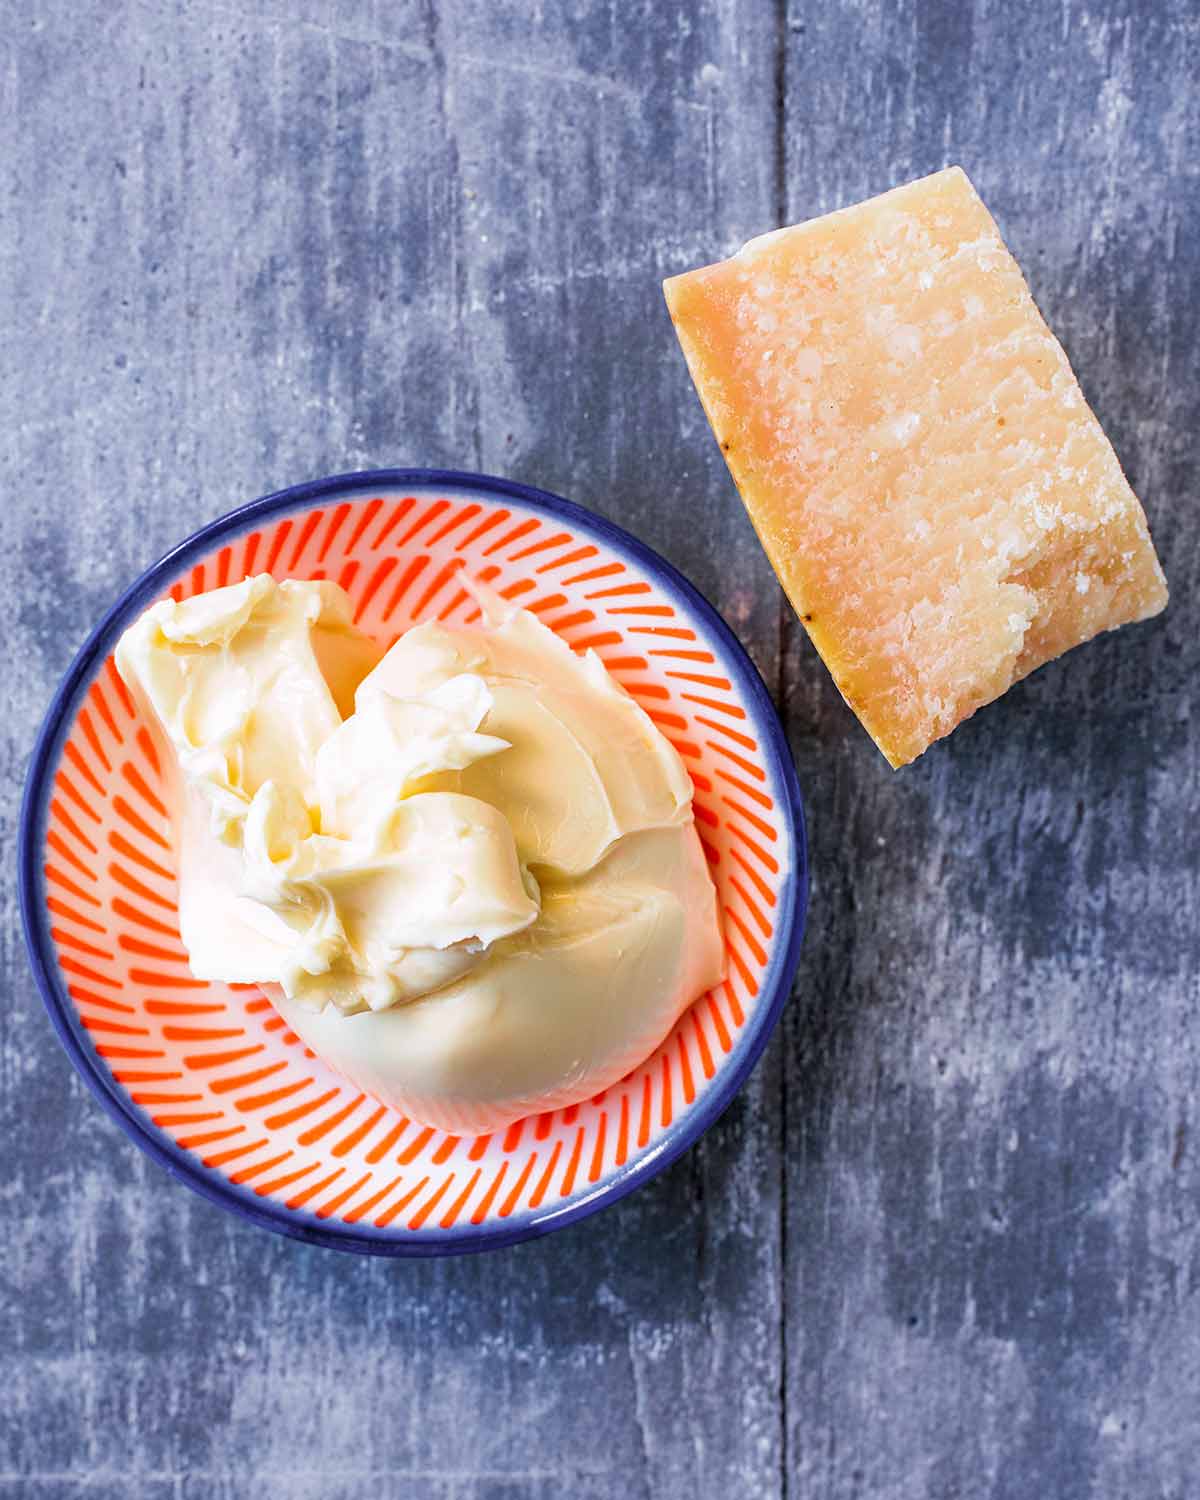 A small dish with a dollop of cream cheese next to a small block of hard cheese.